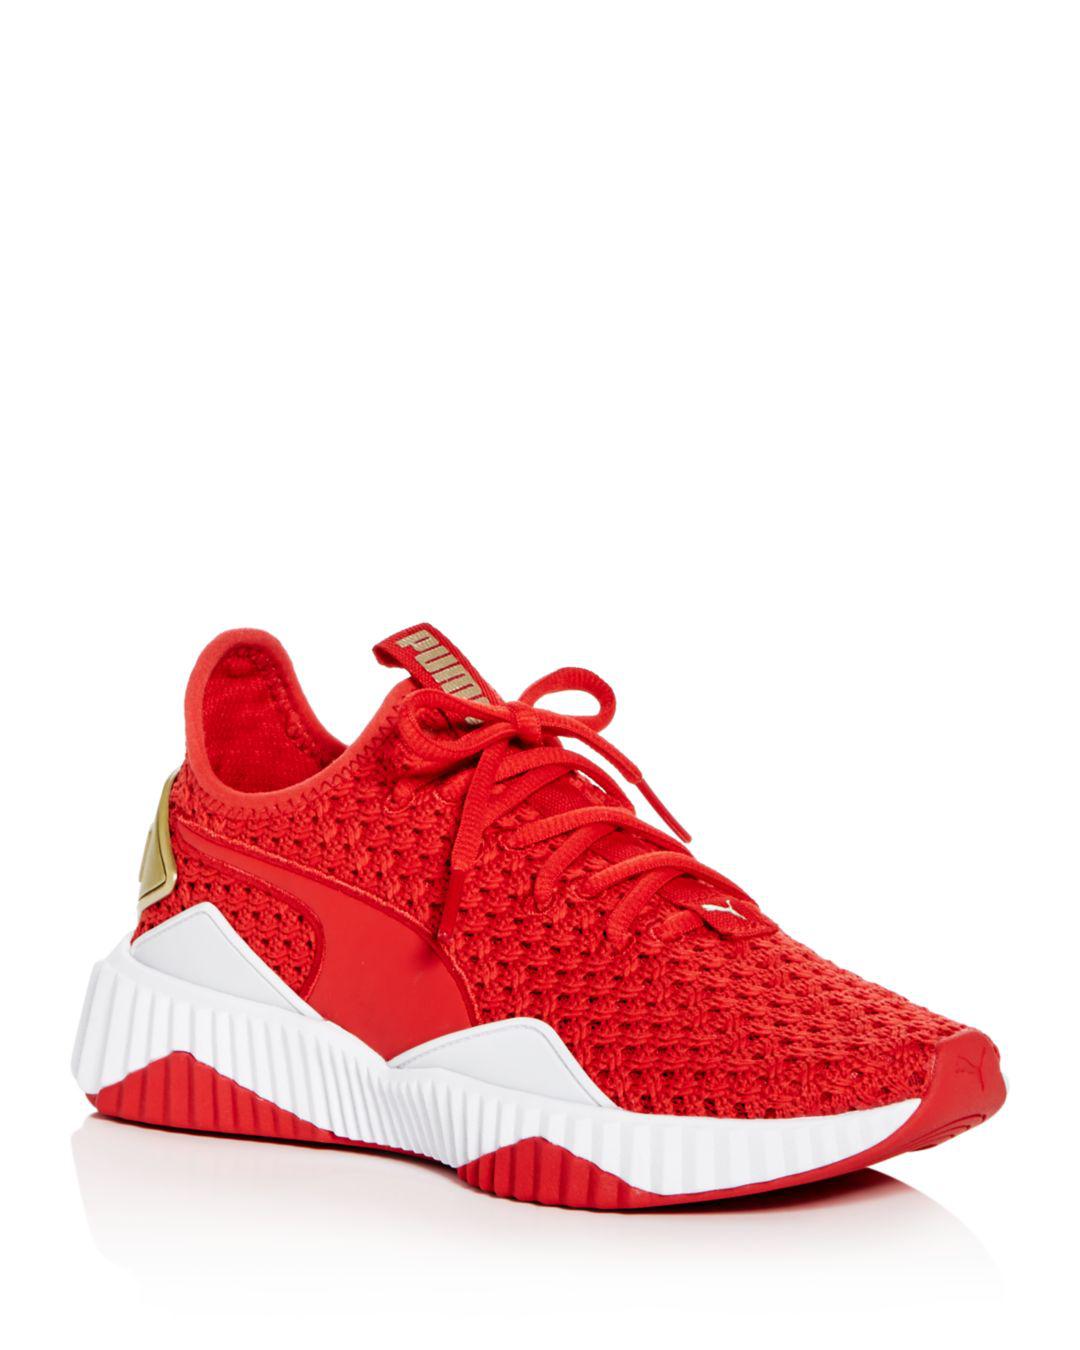 Puma Ribbon Red Womens Defy Varsity Knit Lace Up Sneakers 